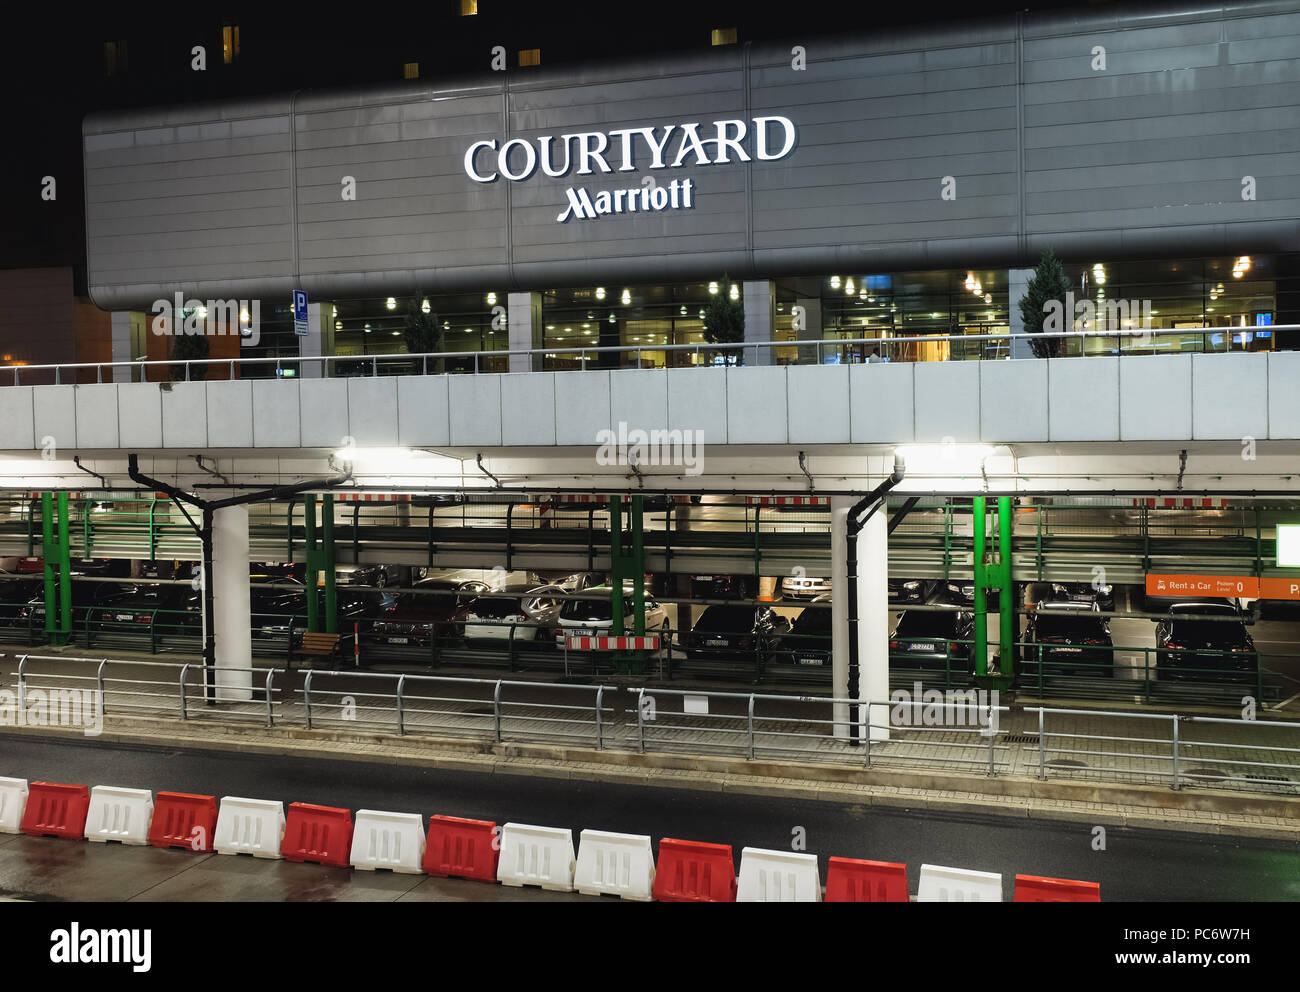 Warsaw, Poland - July 19, 2018: Courtyard by Marriott Hotel at the Chopin International Airport in Warsaw, Poland. Stock Photo